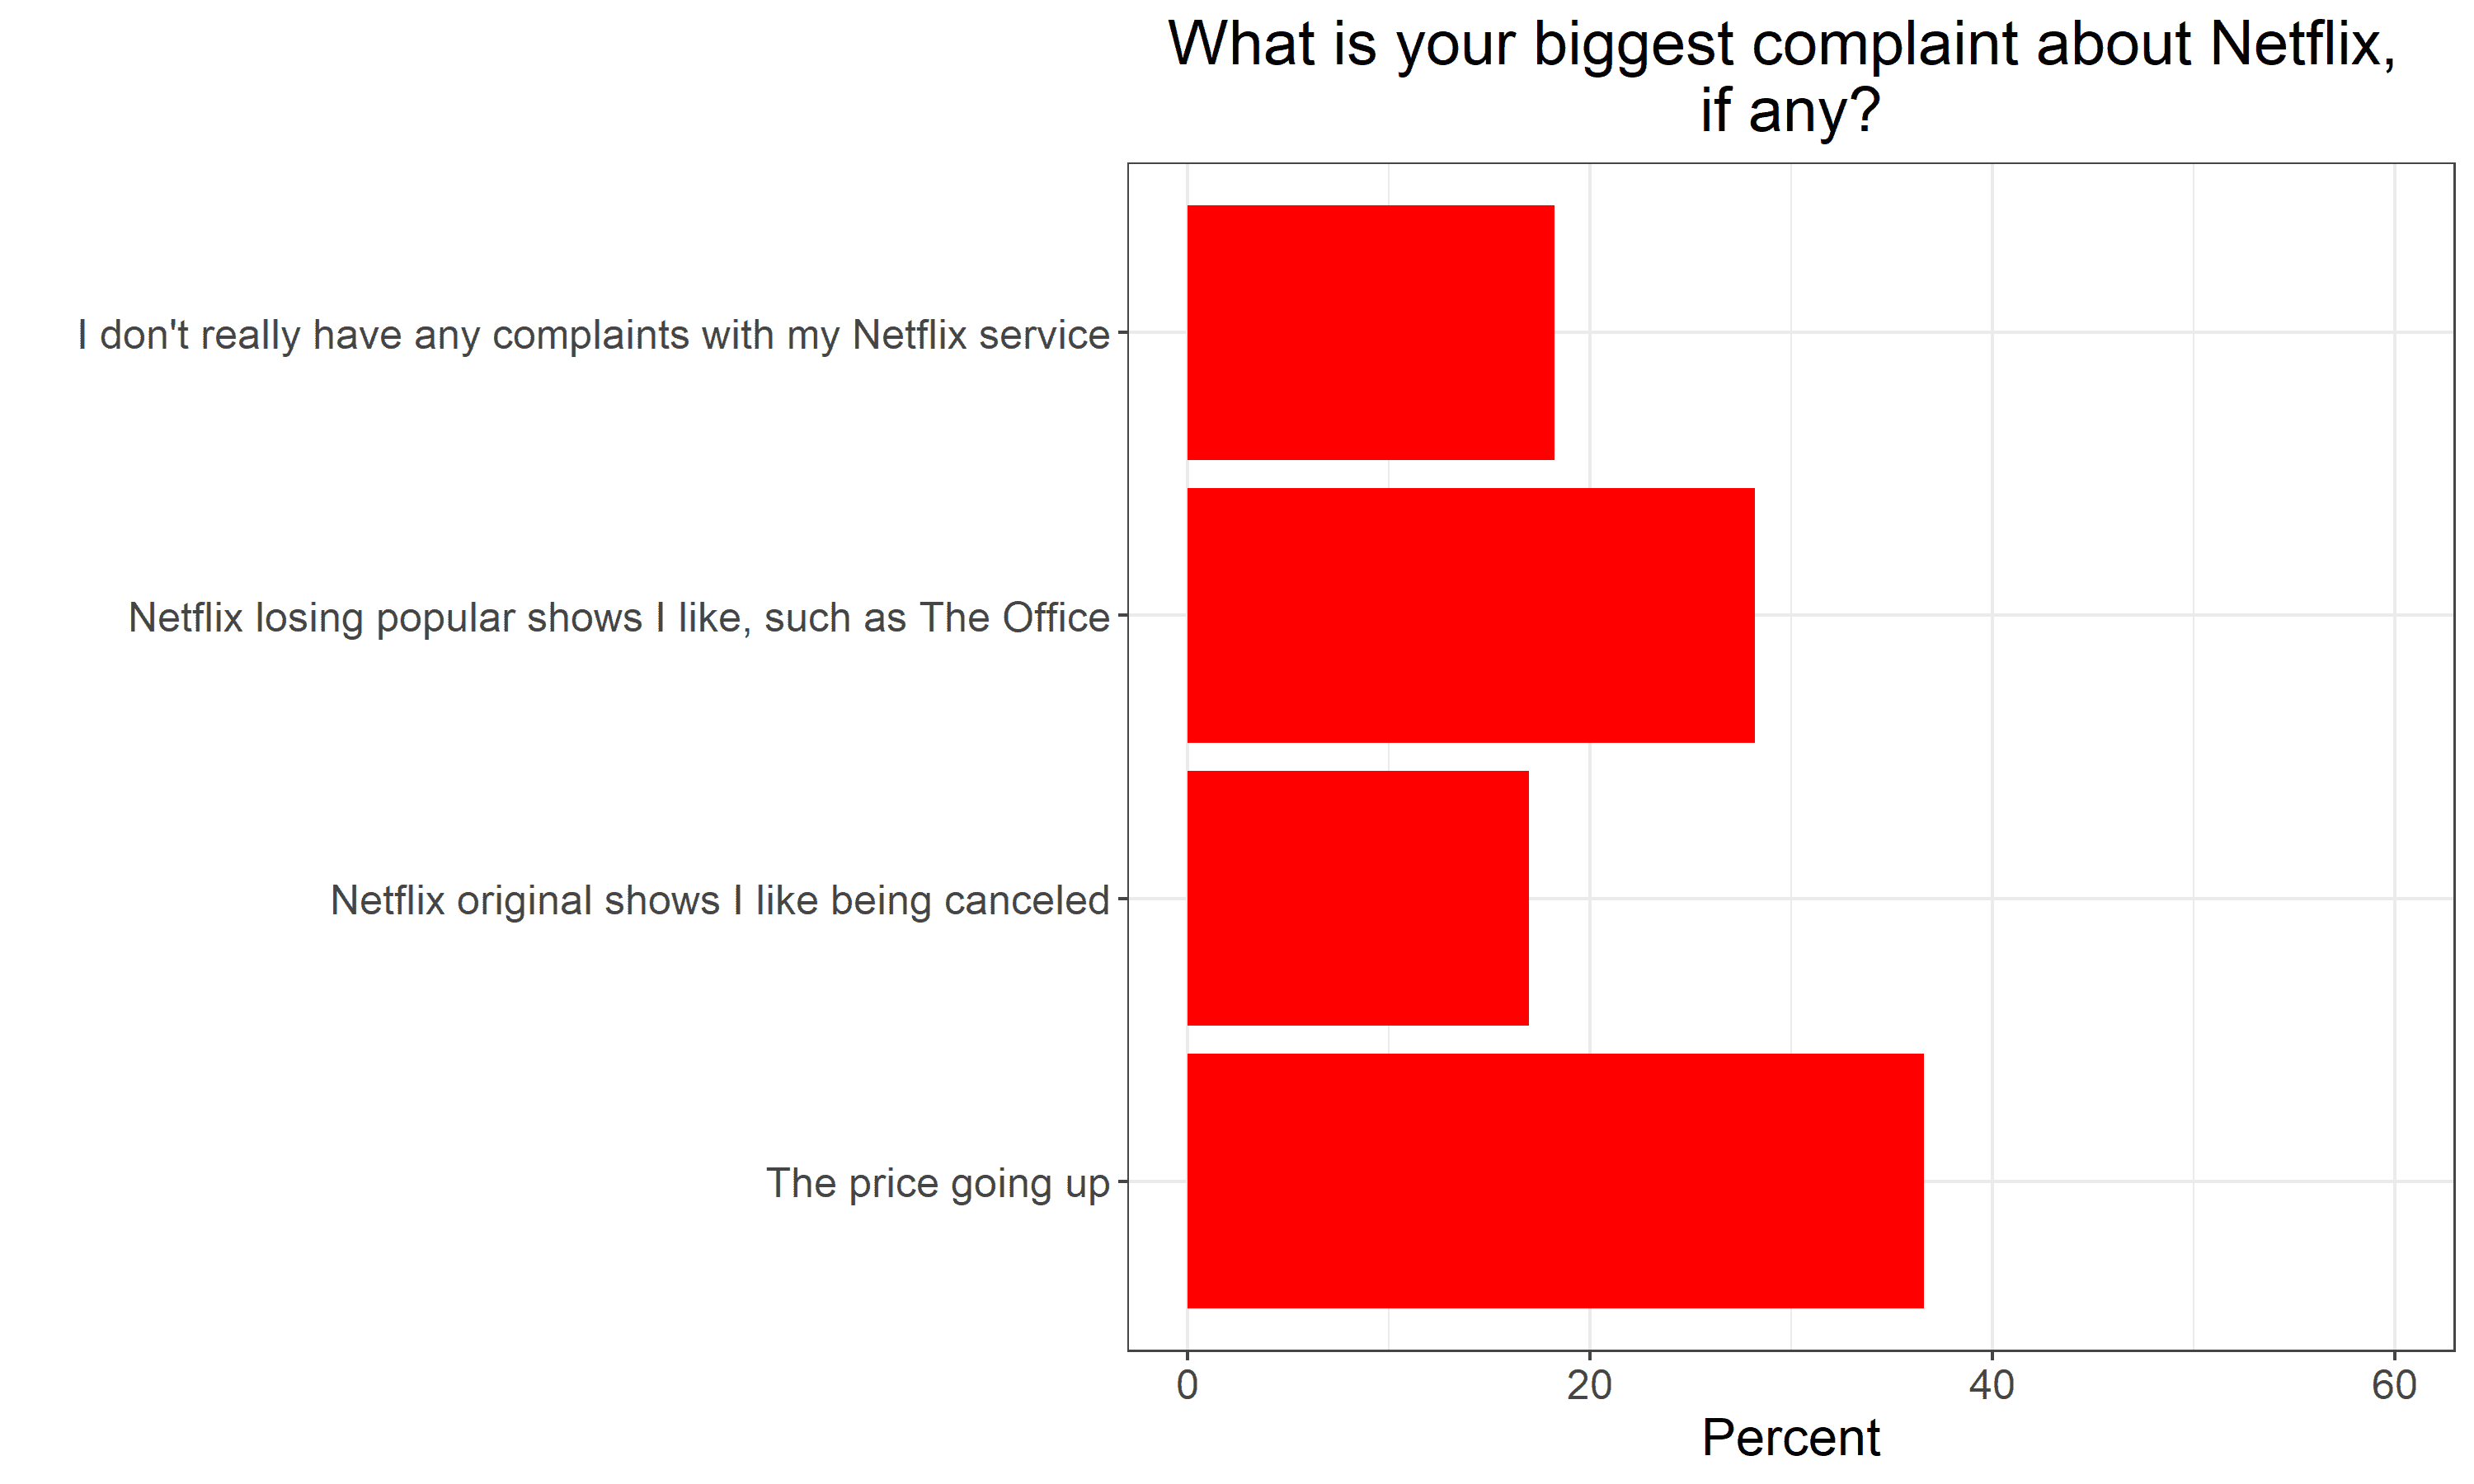 What is your biggest complaint about Netflix, if any?